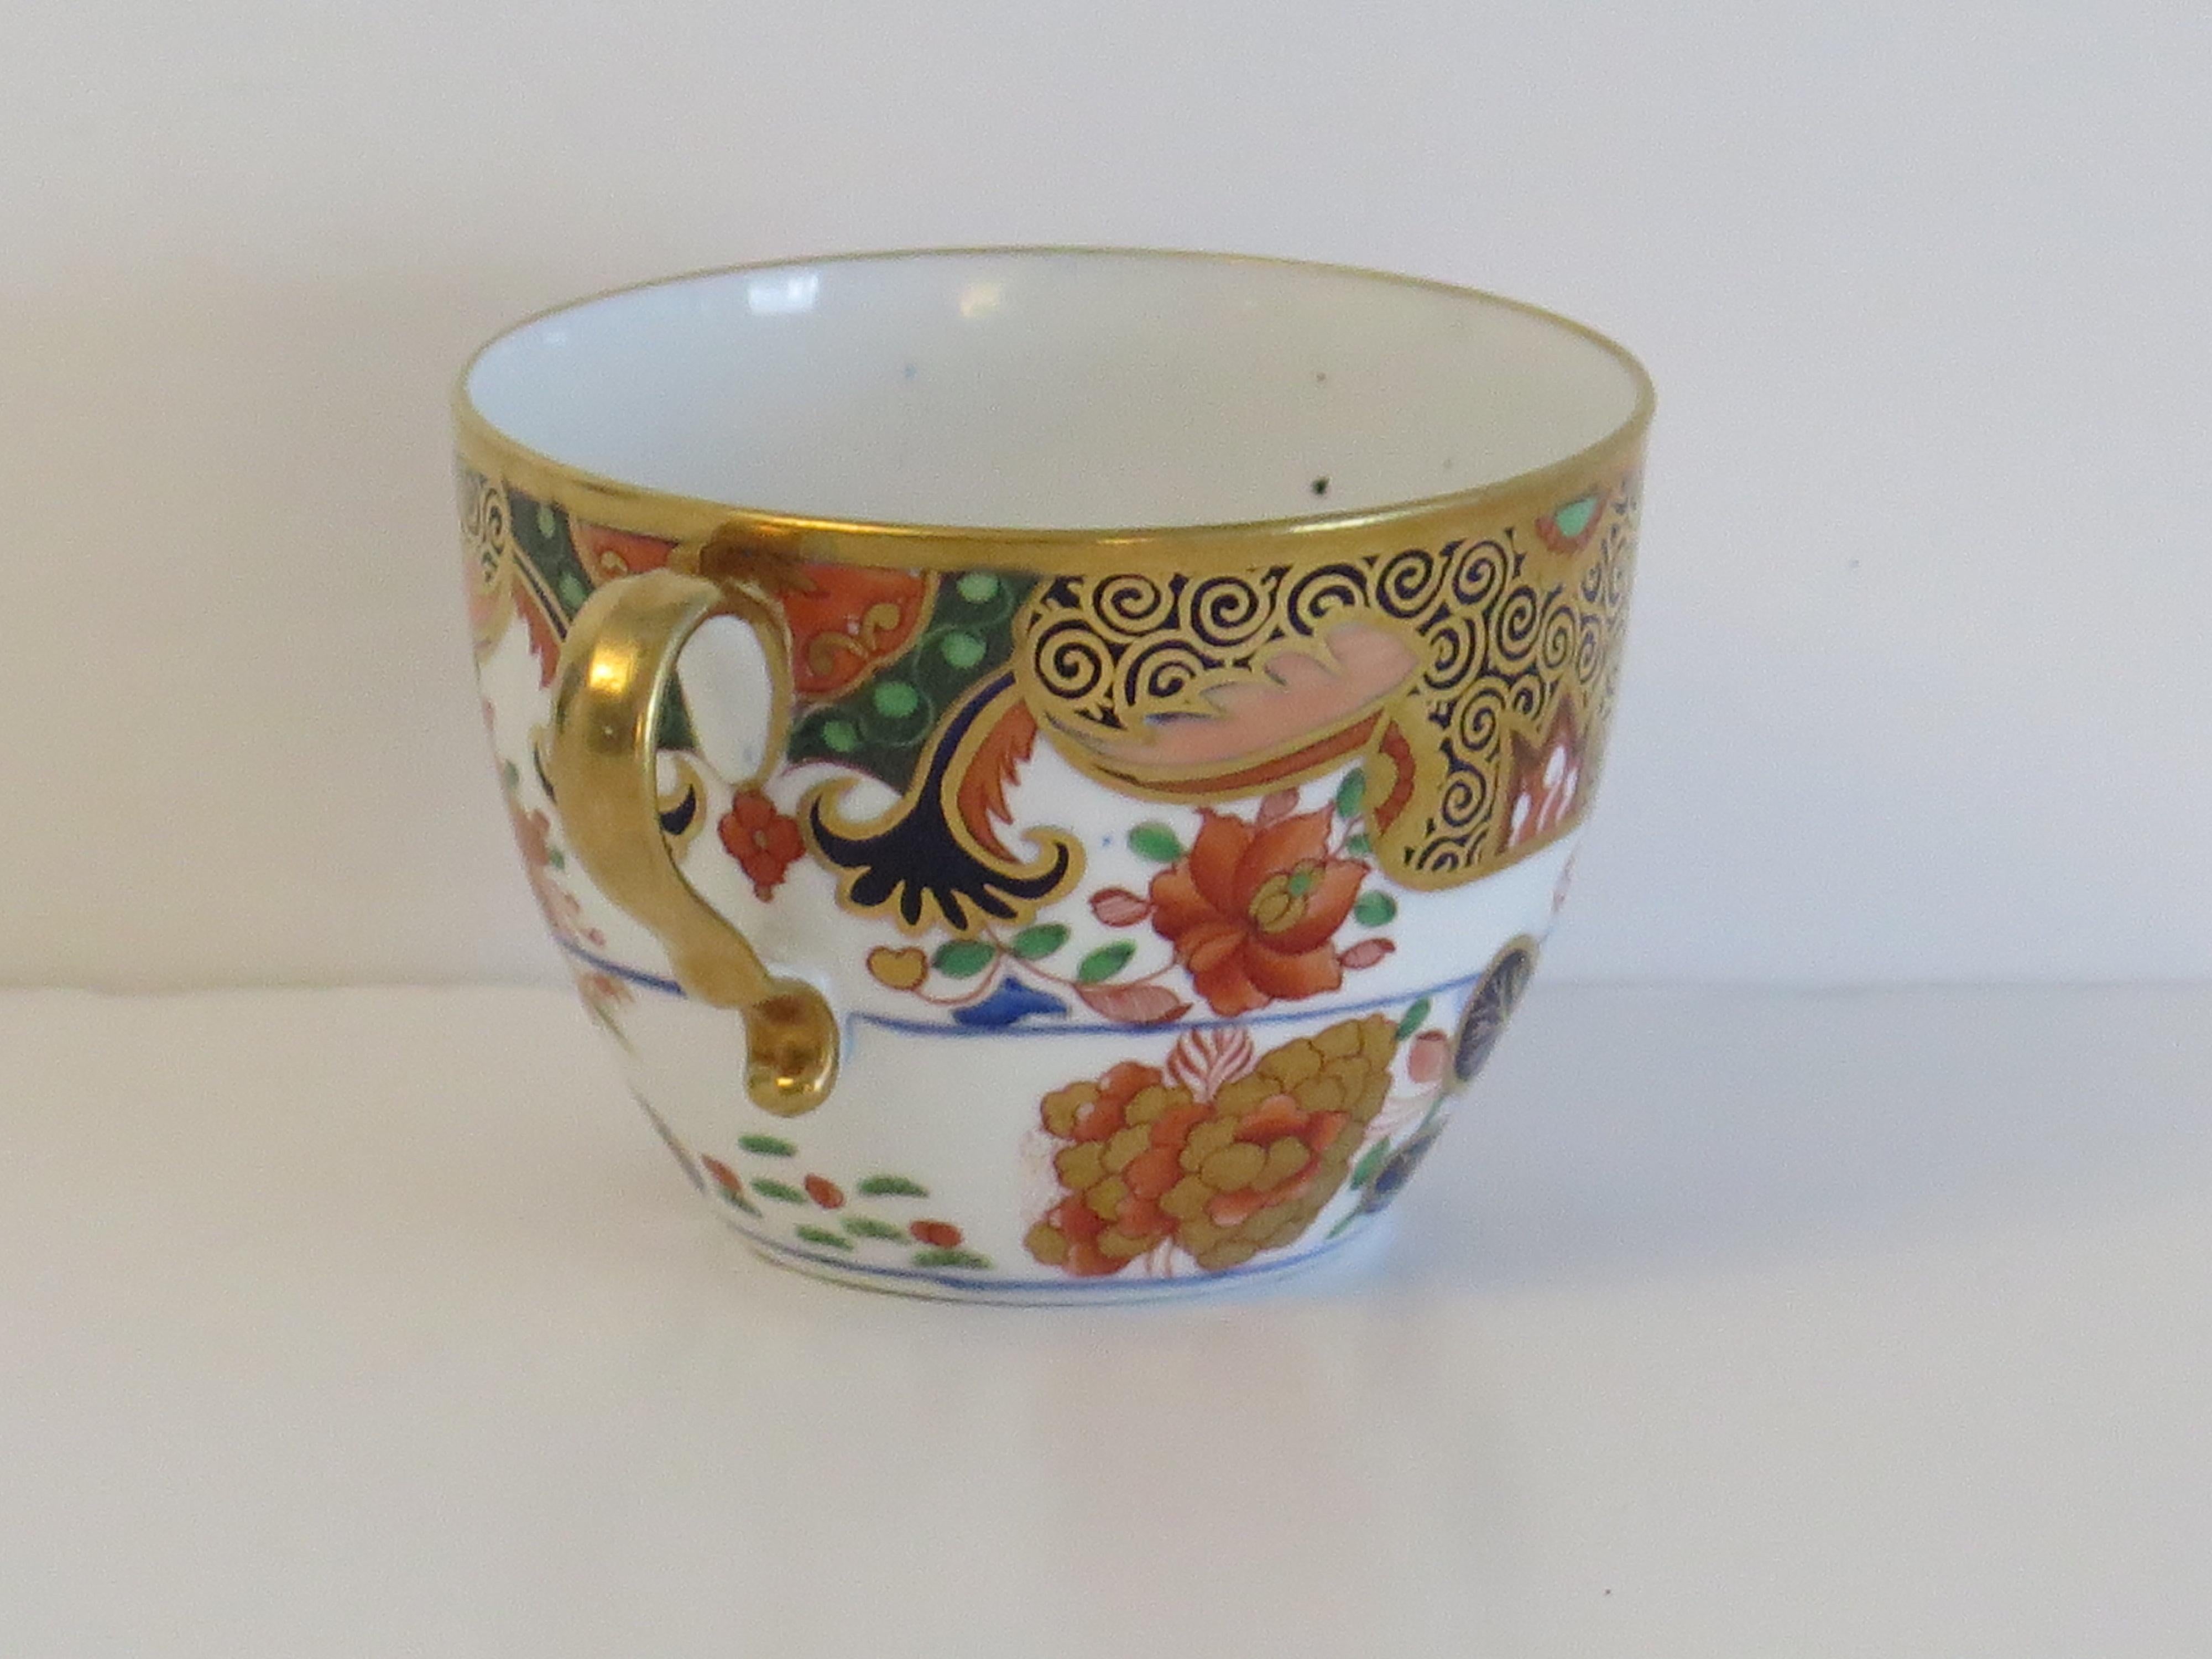 Spode Porcelain Tea Cup in Hand Painted & Gilded Pattern 967, circa 1810 For Sale 1